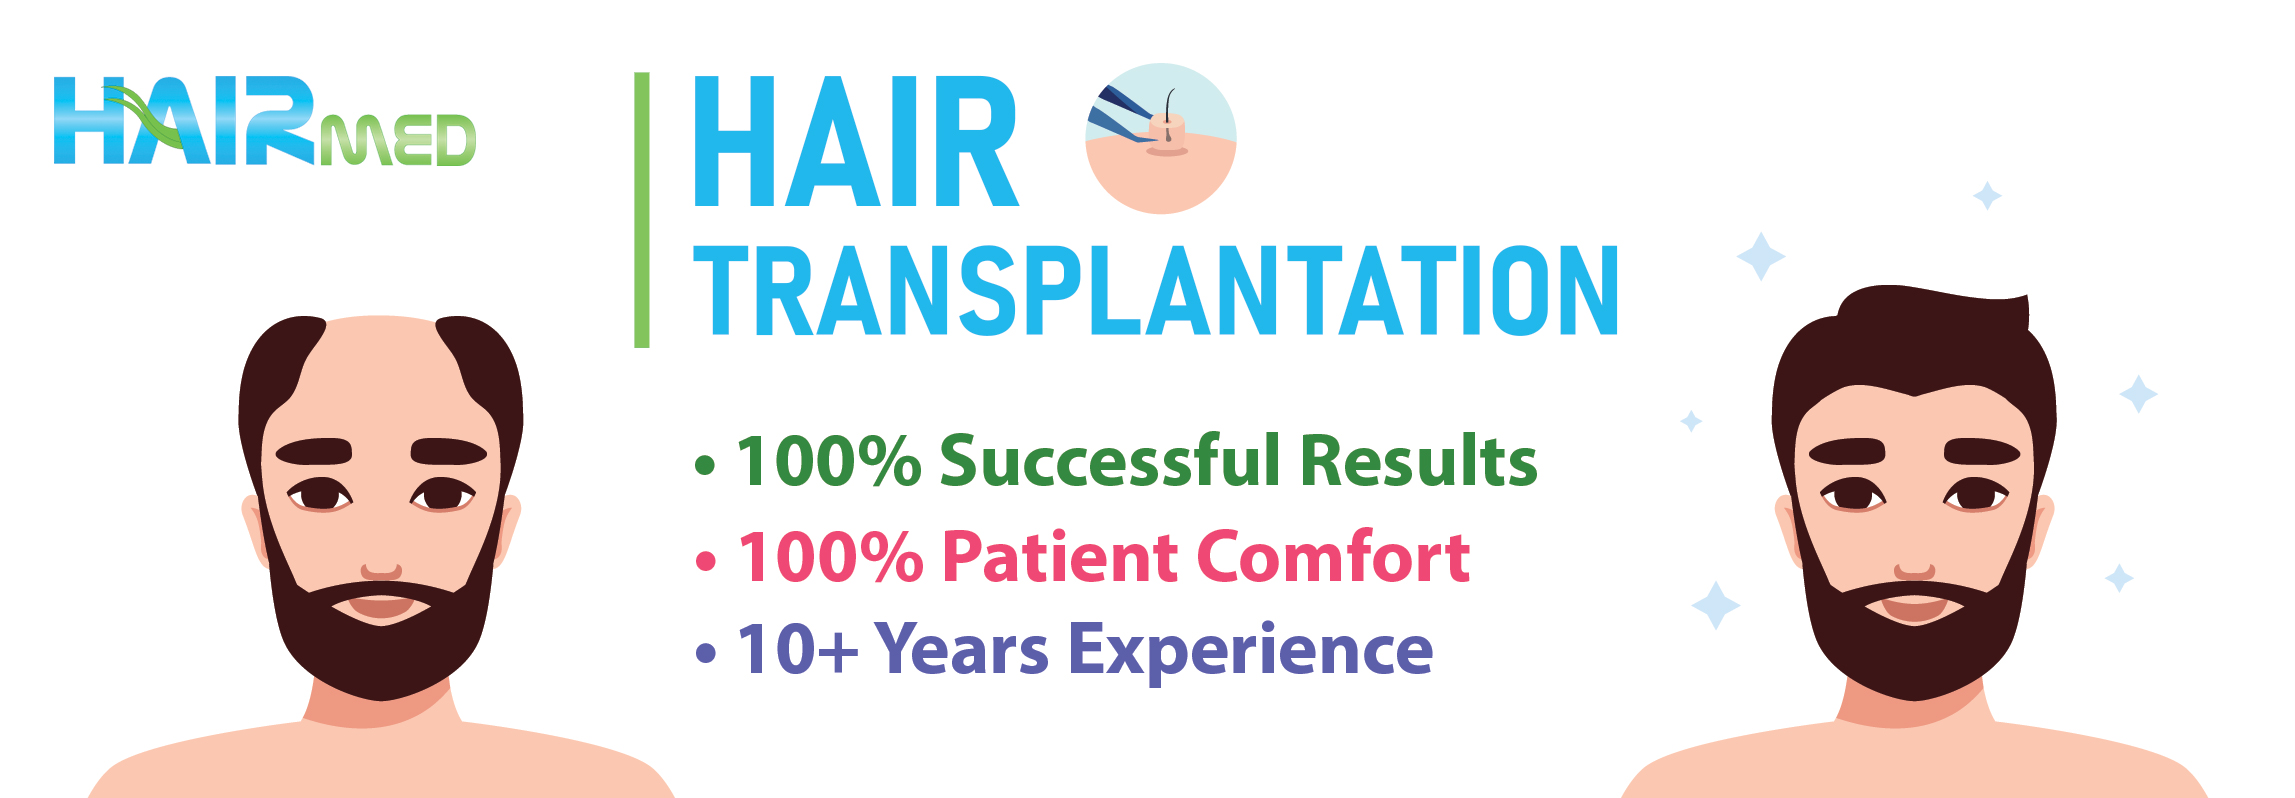 Call us for the price of 3000 graft DHI hair transplant in Turkey